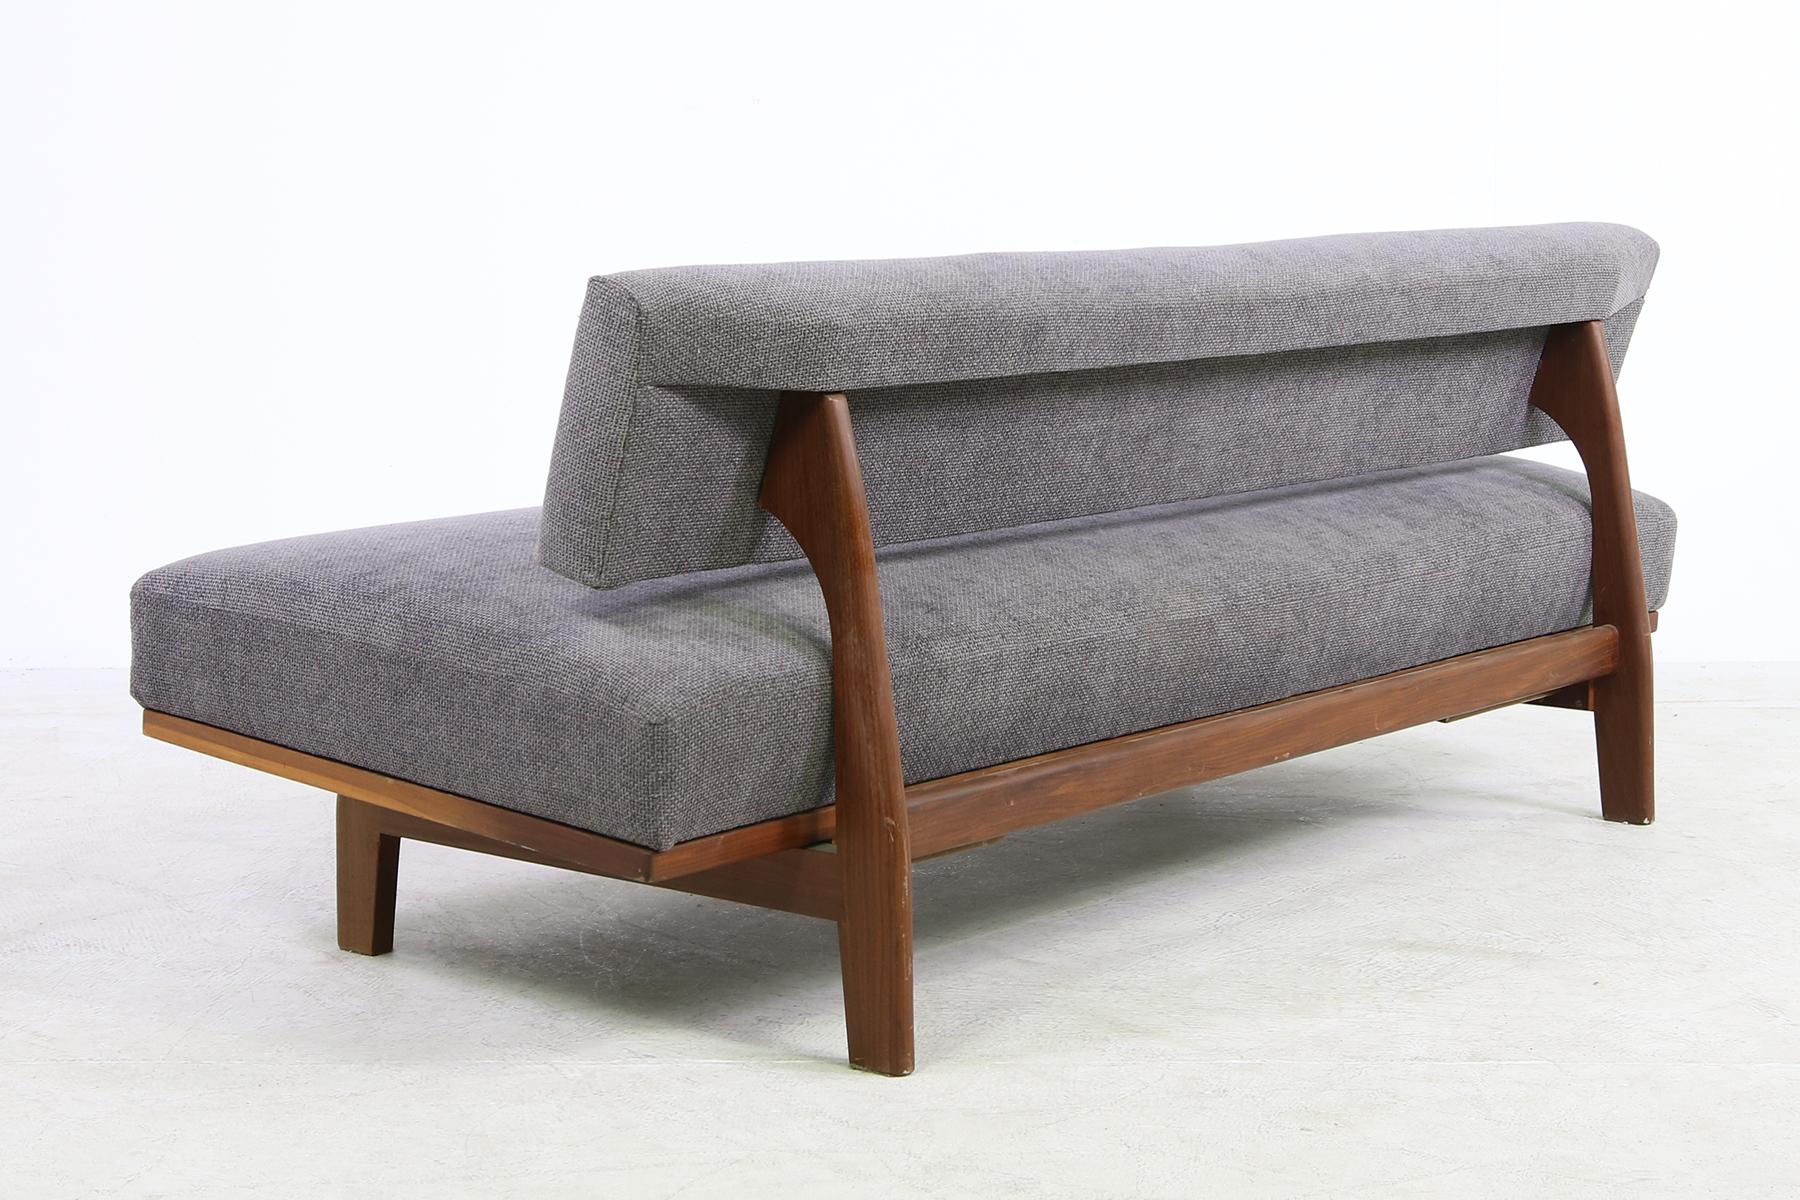 Beautiful daybed mod. 470 by Hans Bellmann for Wilkhahn, Germany.
Fantastic Mid-Century Modern sofa, solid teak base, upholstery & fabric renewed and covered with a unique and special dark grey woven fabric. Overall an amazing condition. The